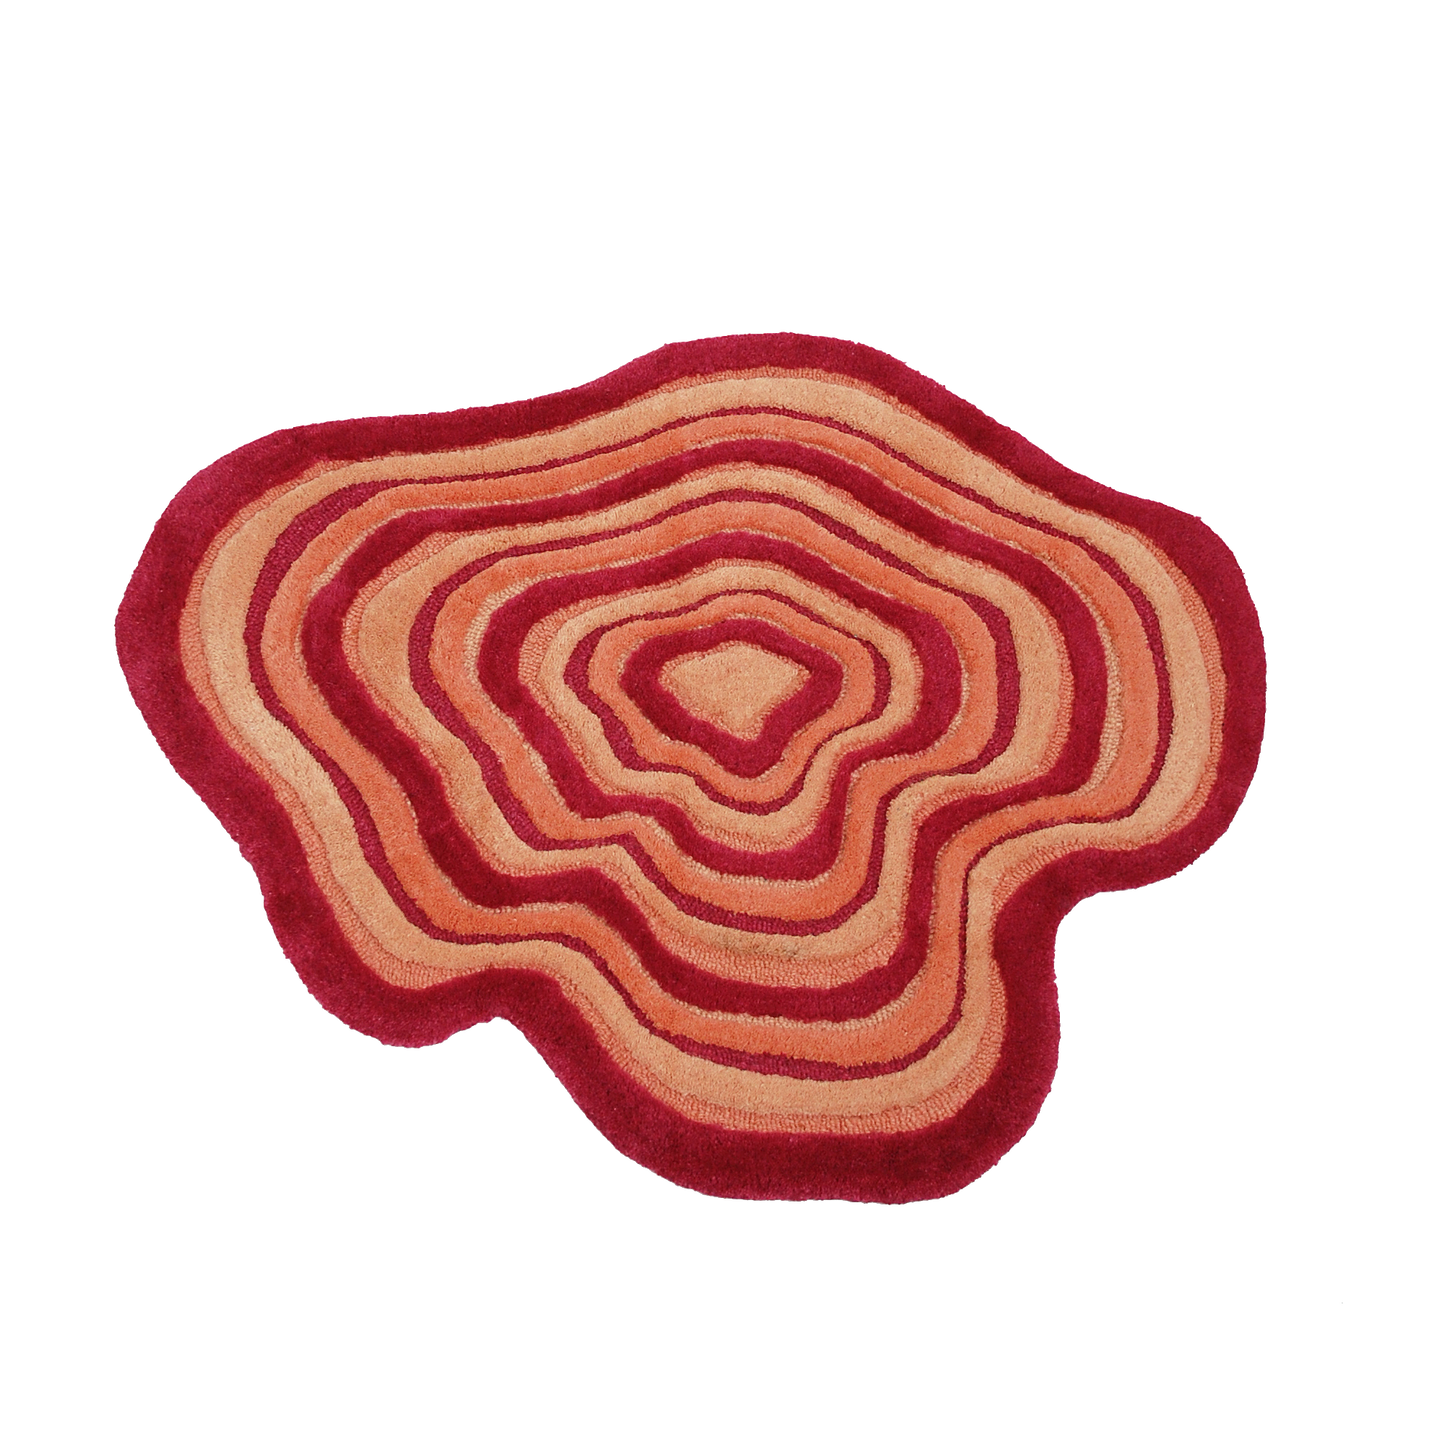 Our portal rug is an abstract blob shape featuring 3 colours (red, light peach, and orange). This rug is unique with 2 different textures included.